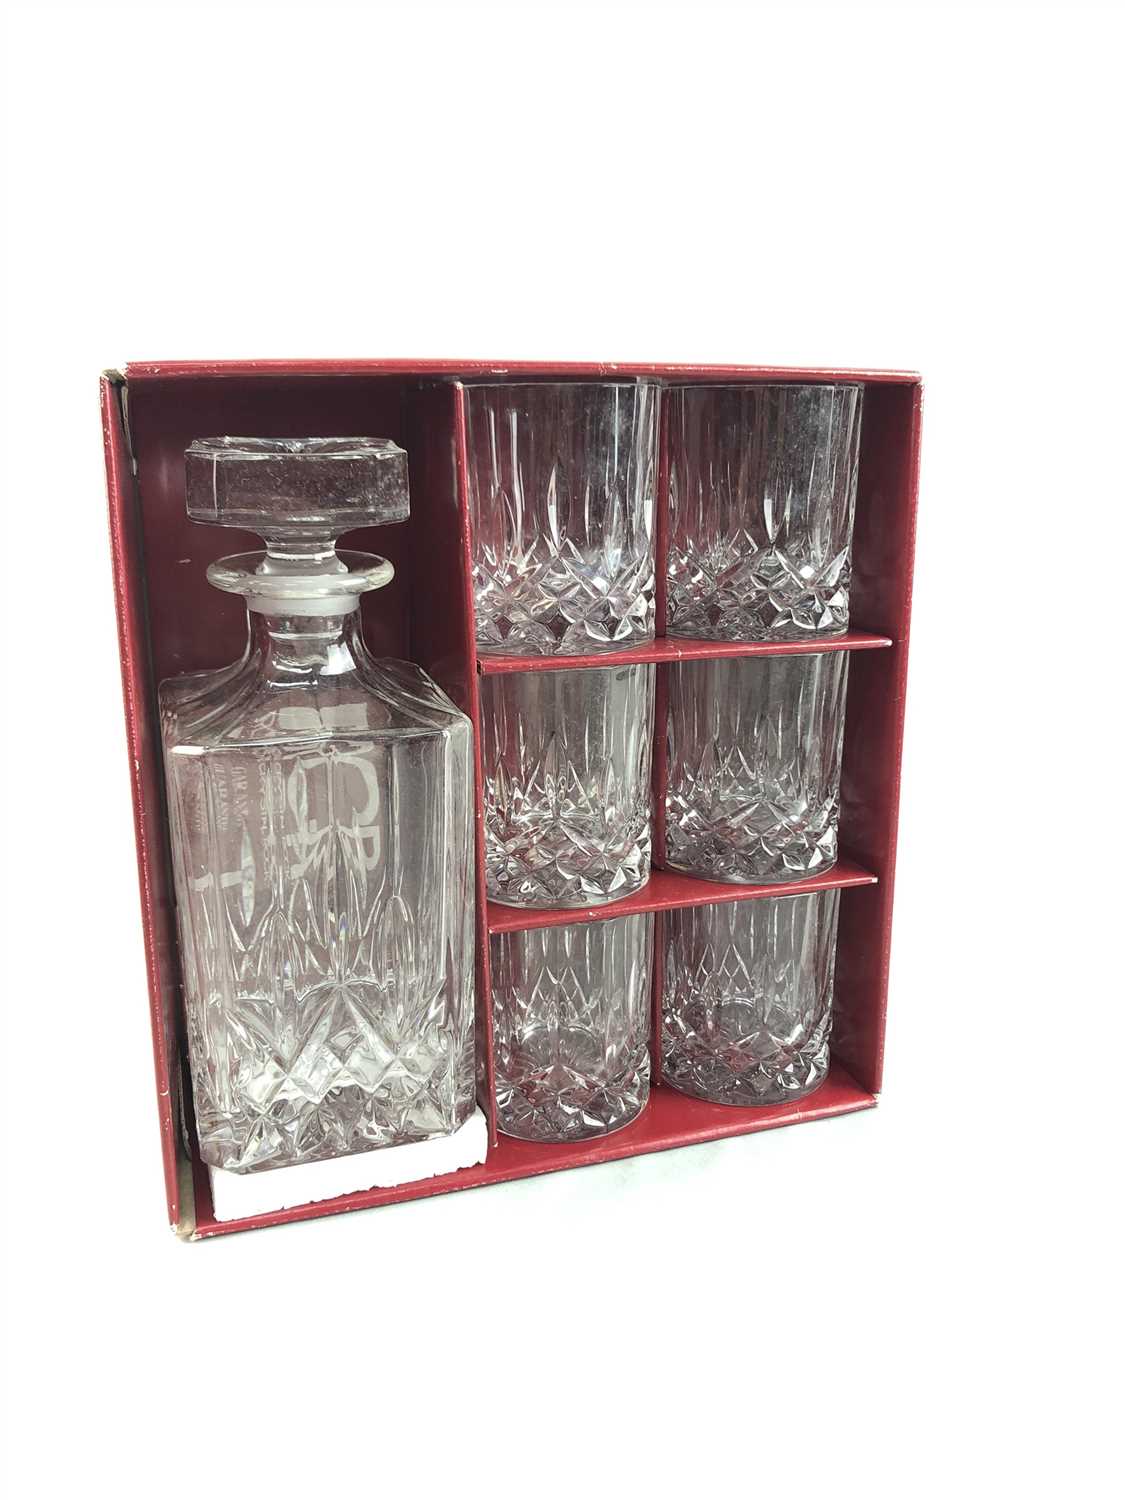 Lot 124 - A BOXED SET OF OPERA CRYSTAL WHISKY DECANTER AND TUMBLERS